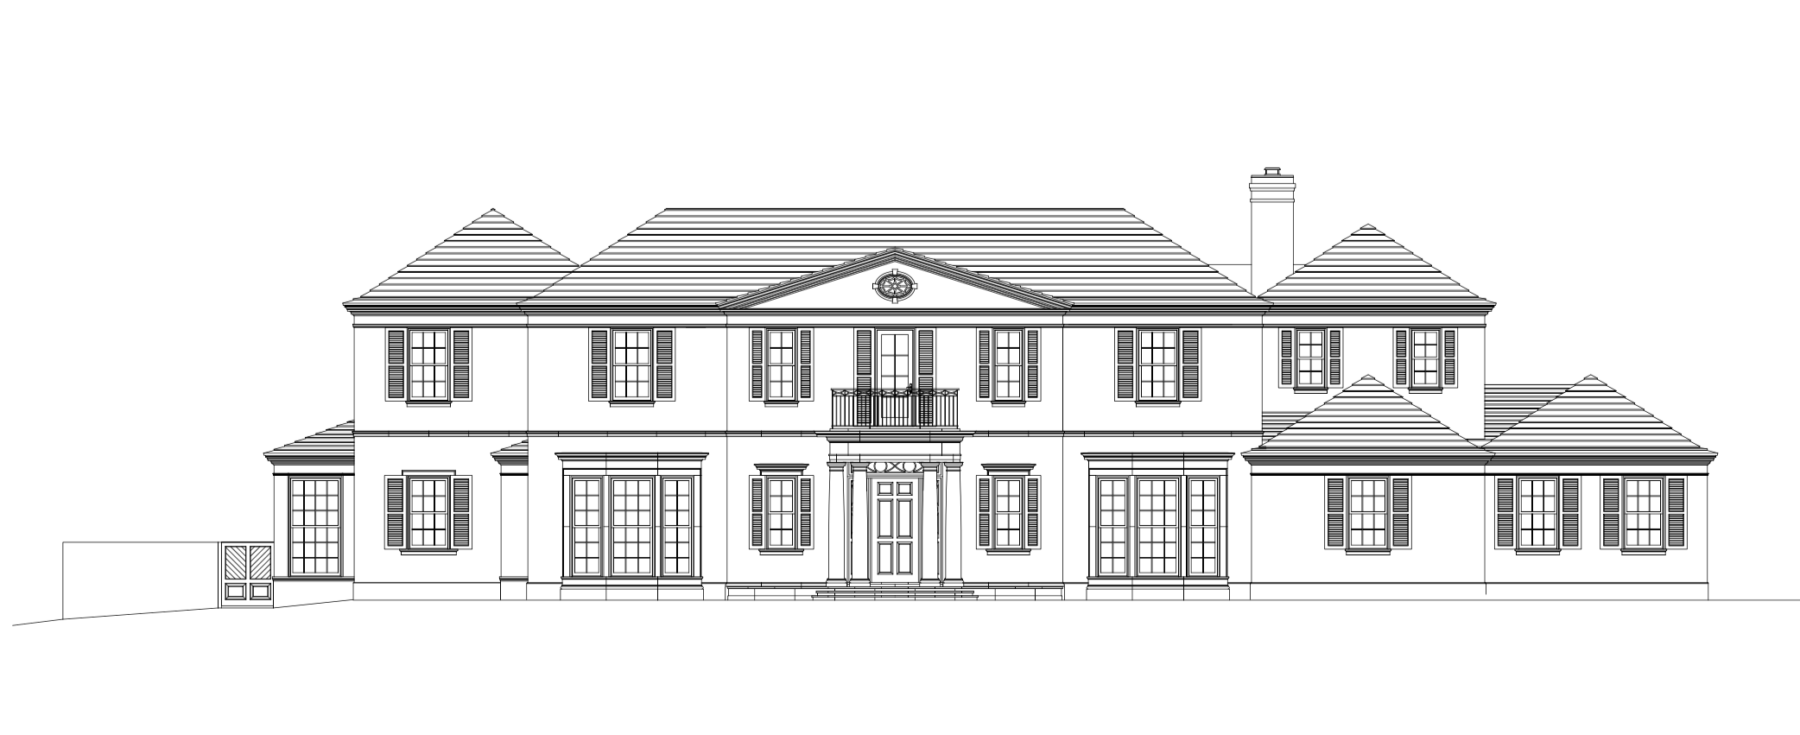 Elevation image of two story home